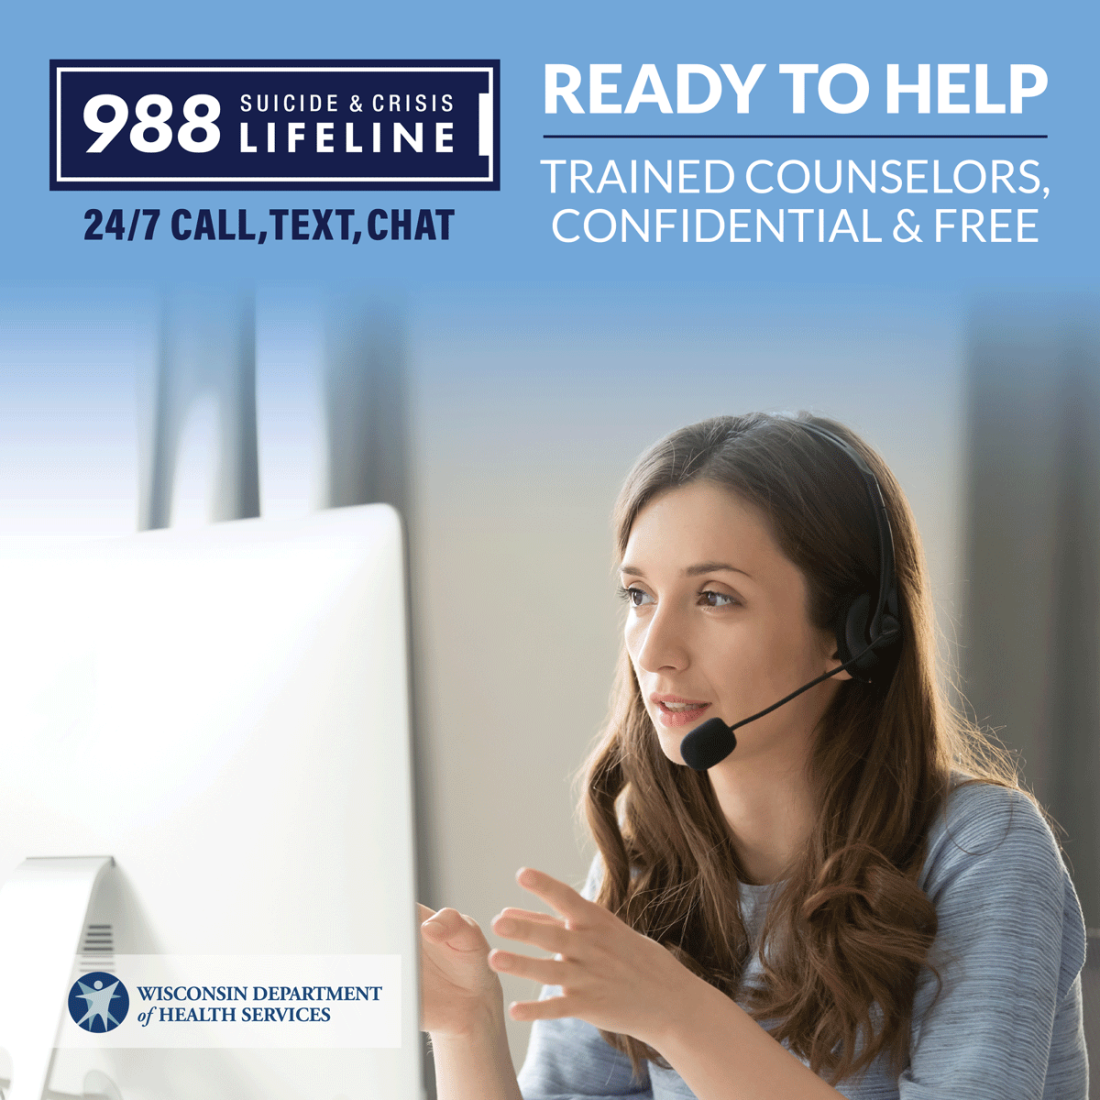 Counselor - Ready to Help - 988 Suicide & Crisis Lifeline